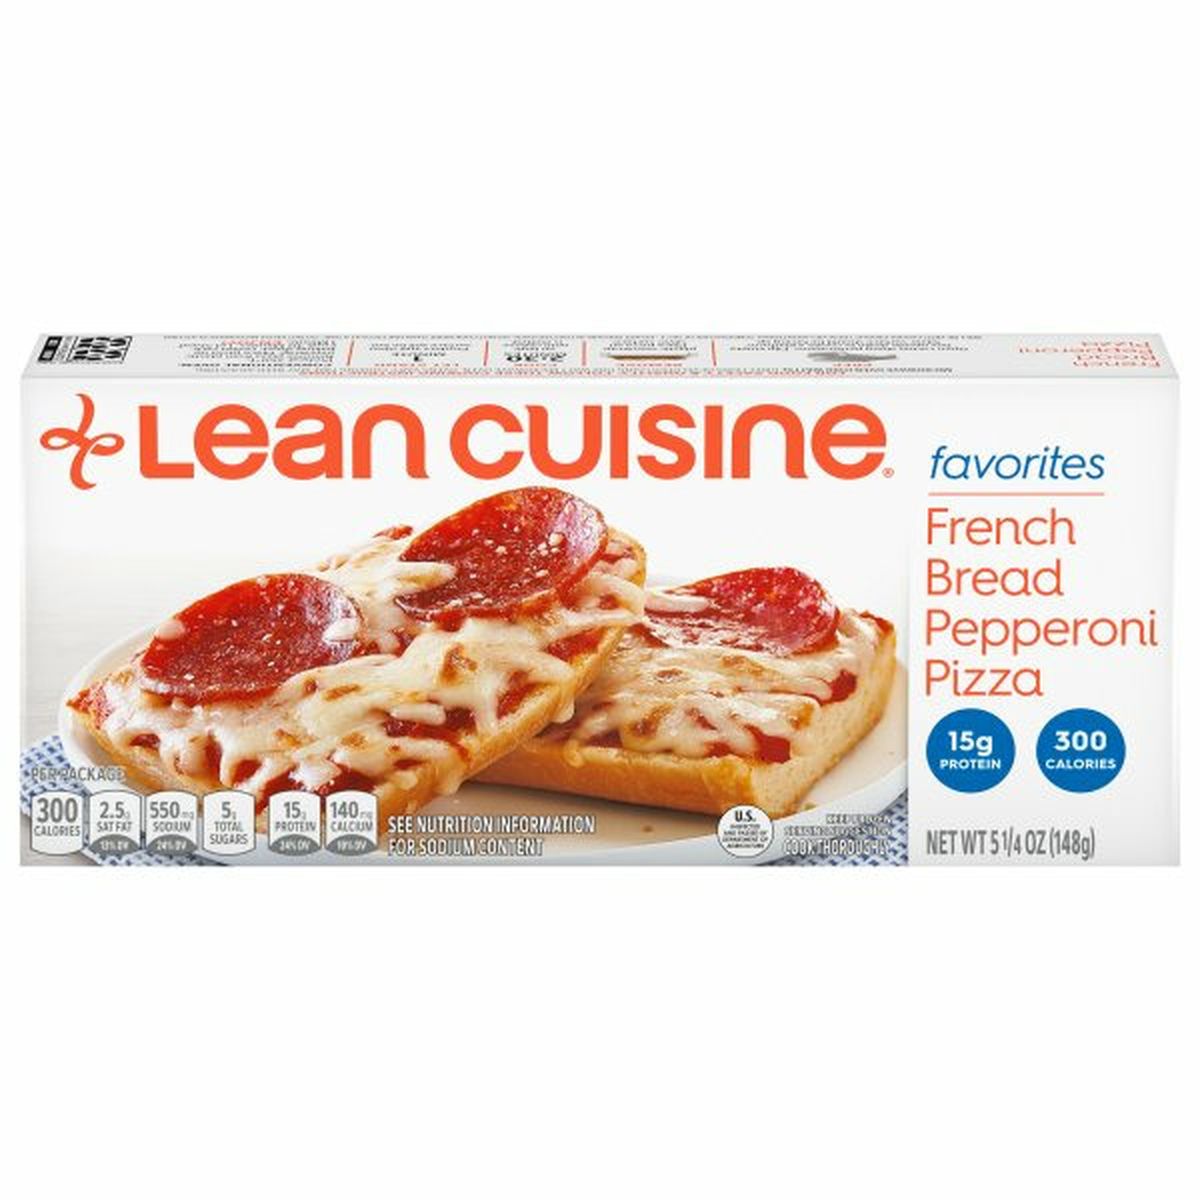 Calories in Lean Cuisine Favorites Pizza, Pepperoni, French Bread